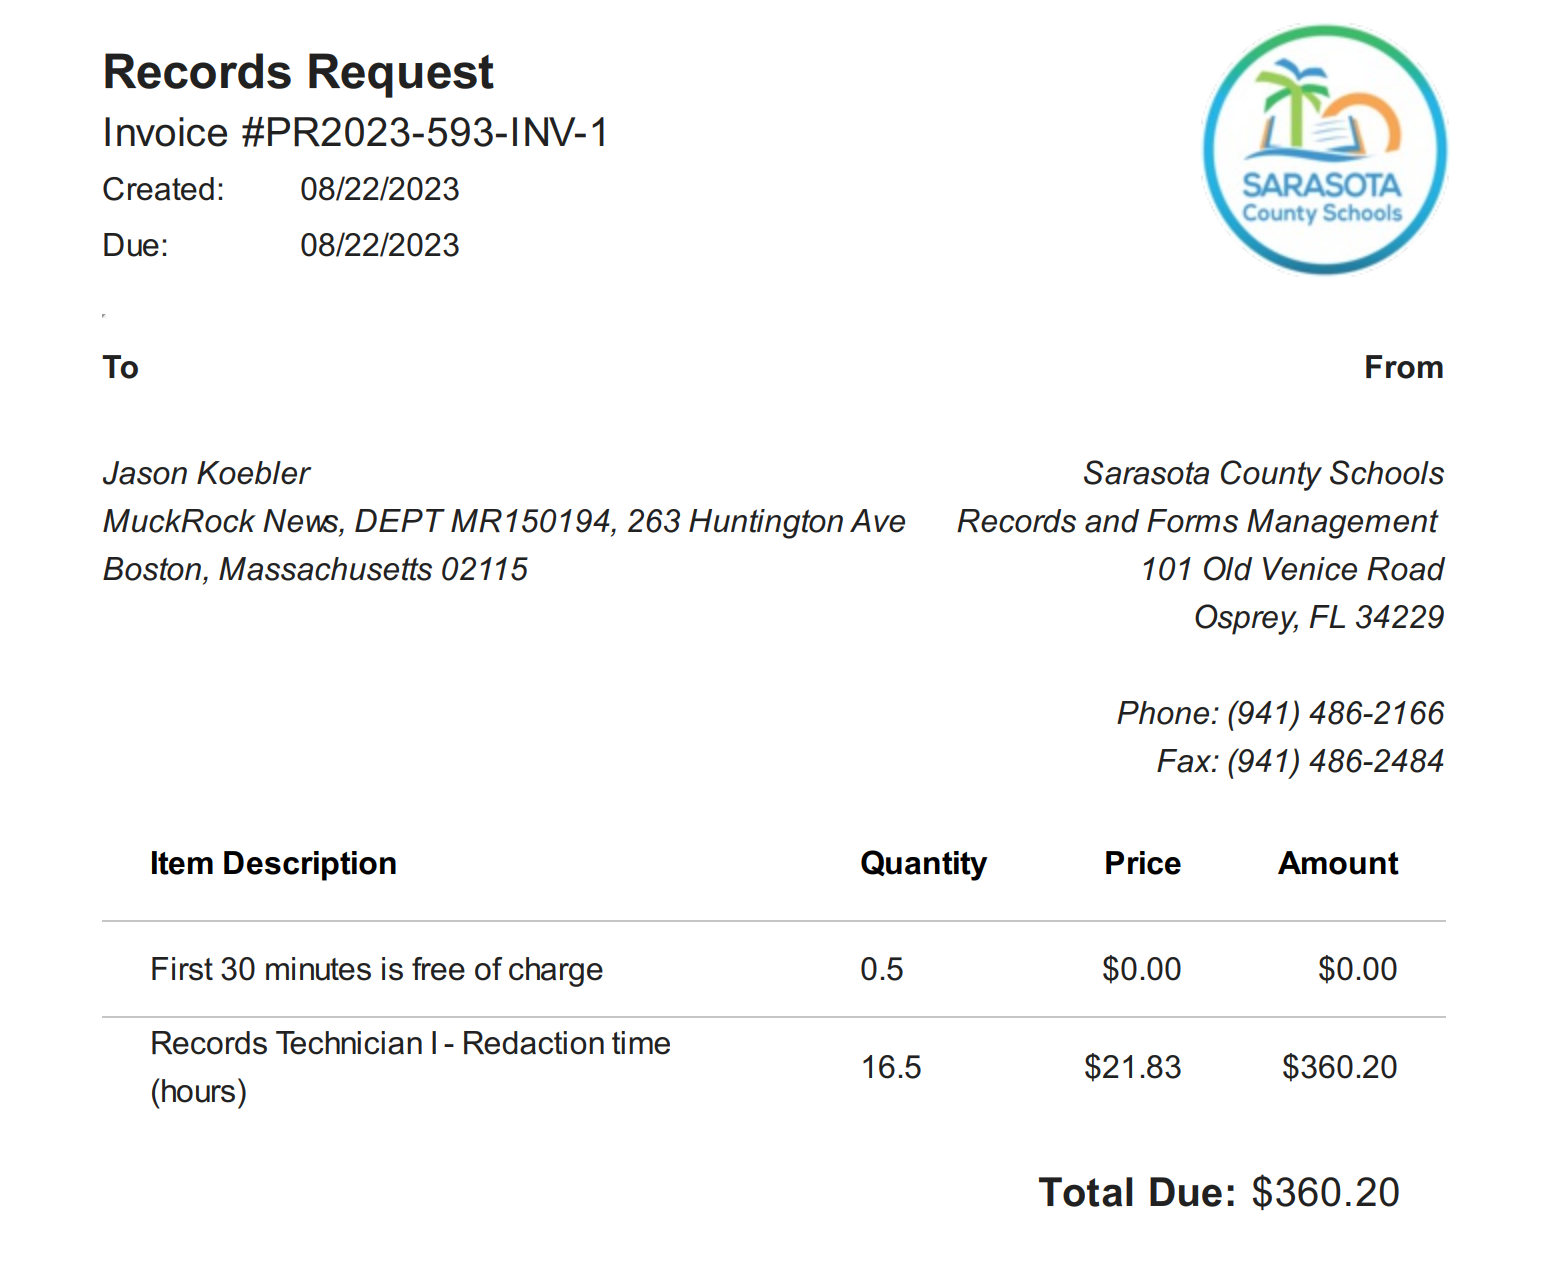 Sarasota County Schools wants $360.20 to redact documents that it initially told me it it didn't even have.